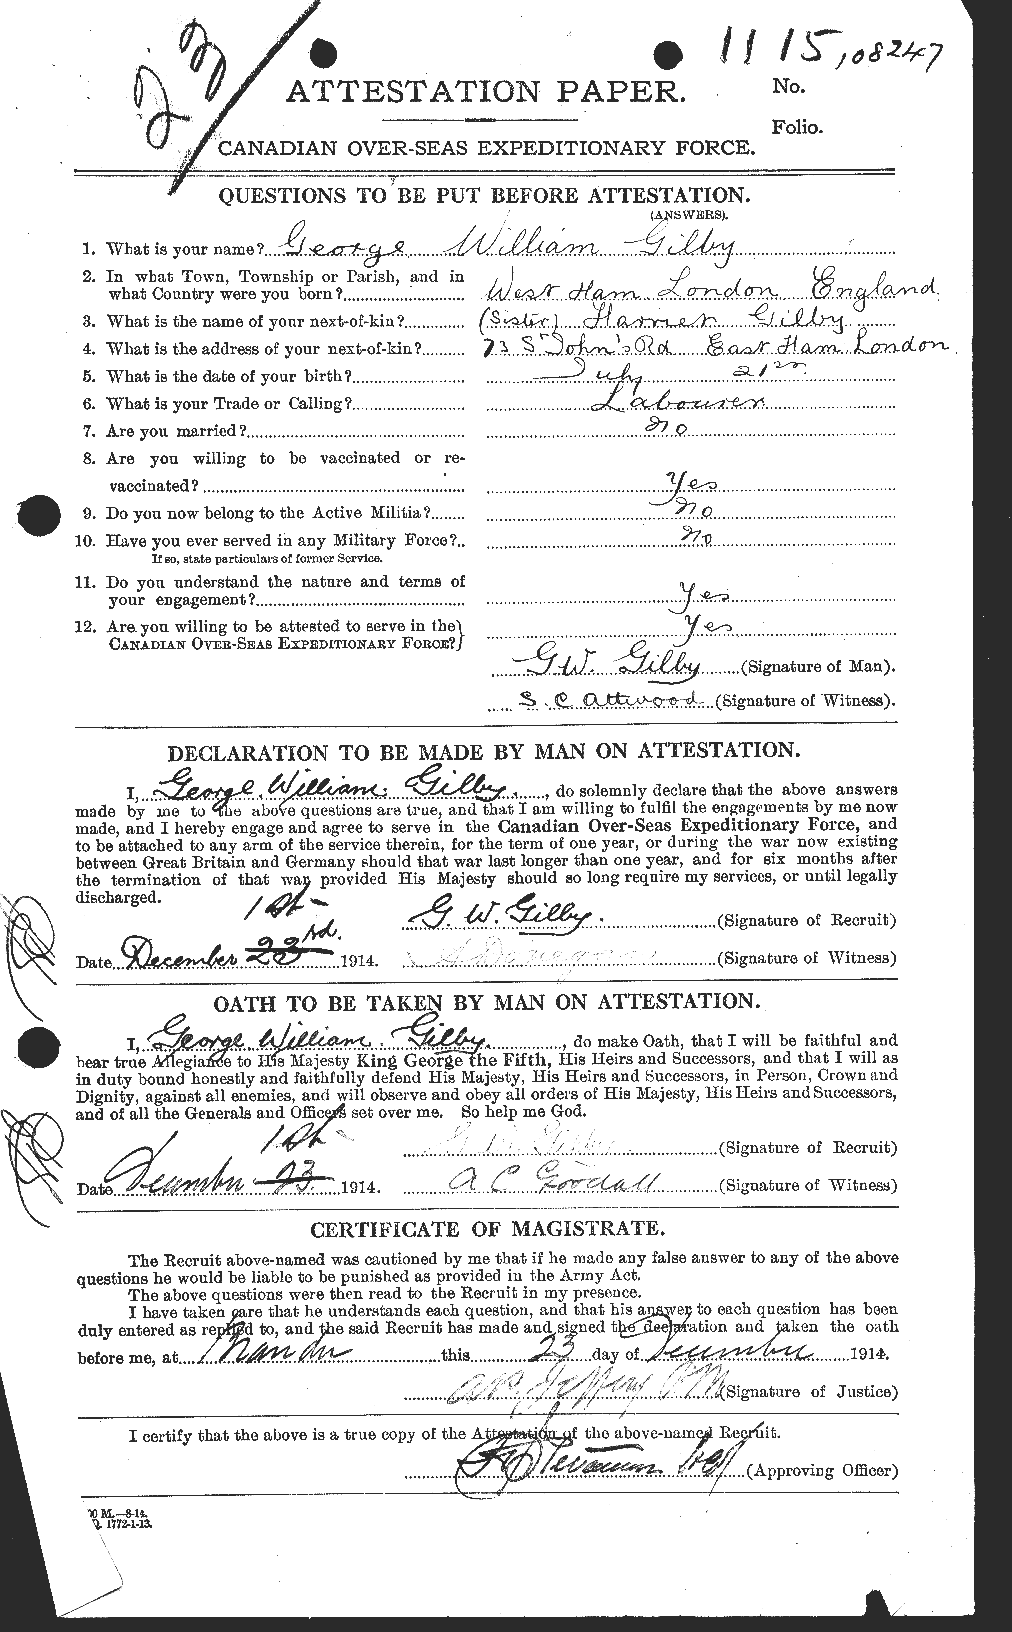 Personnel Records of the First World War - CEF 346925a